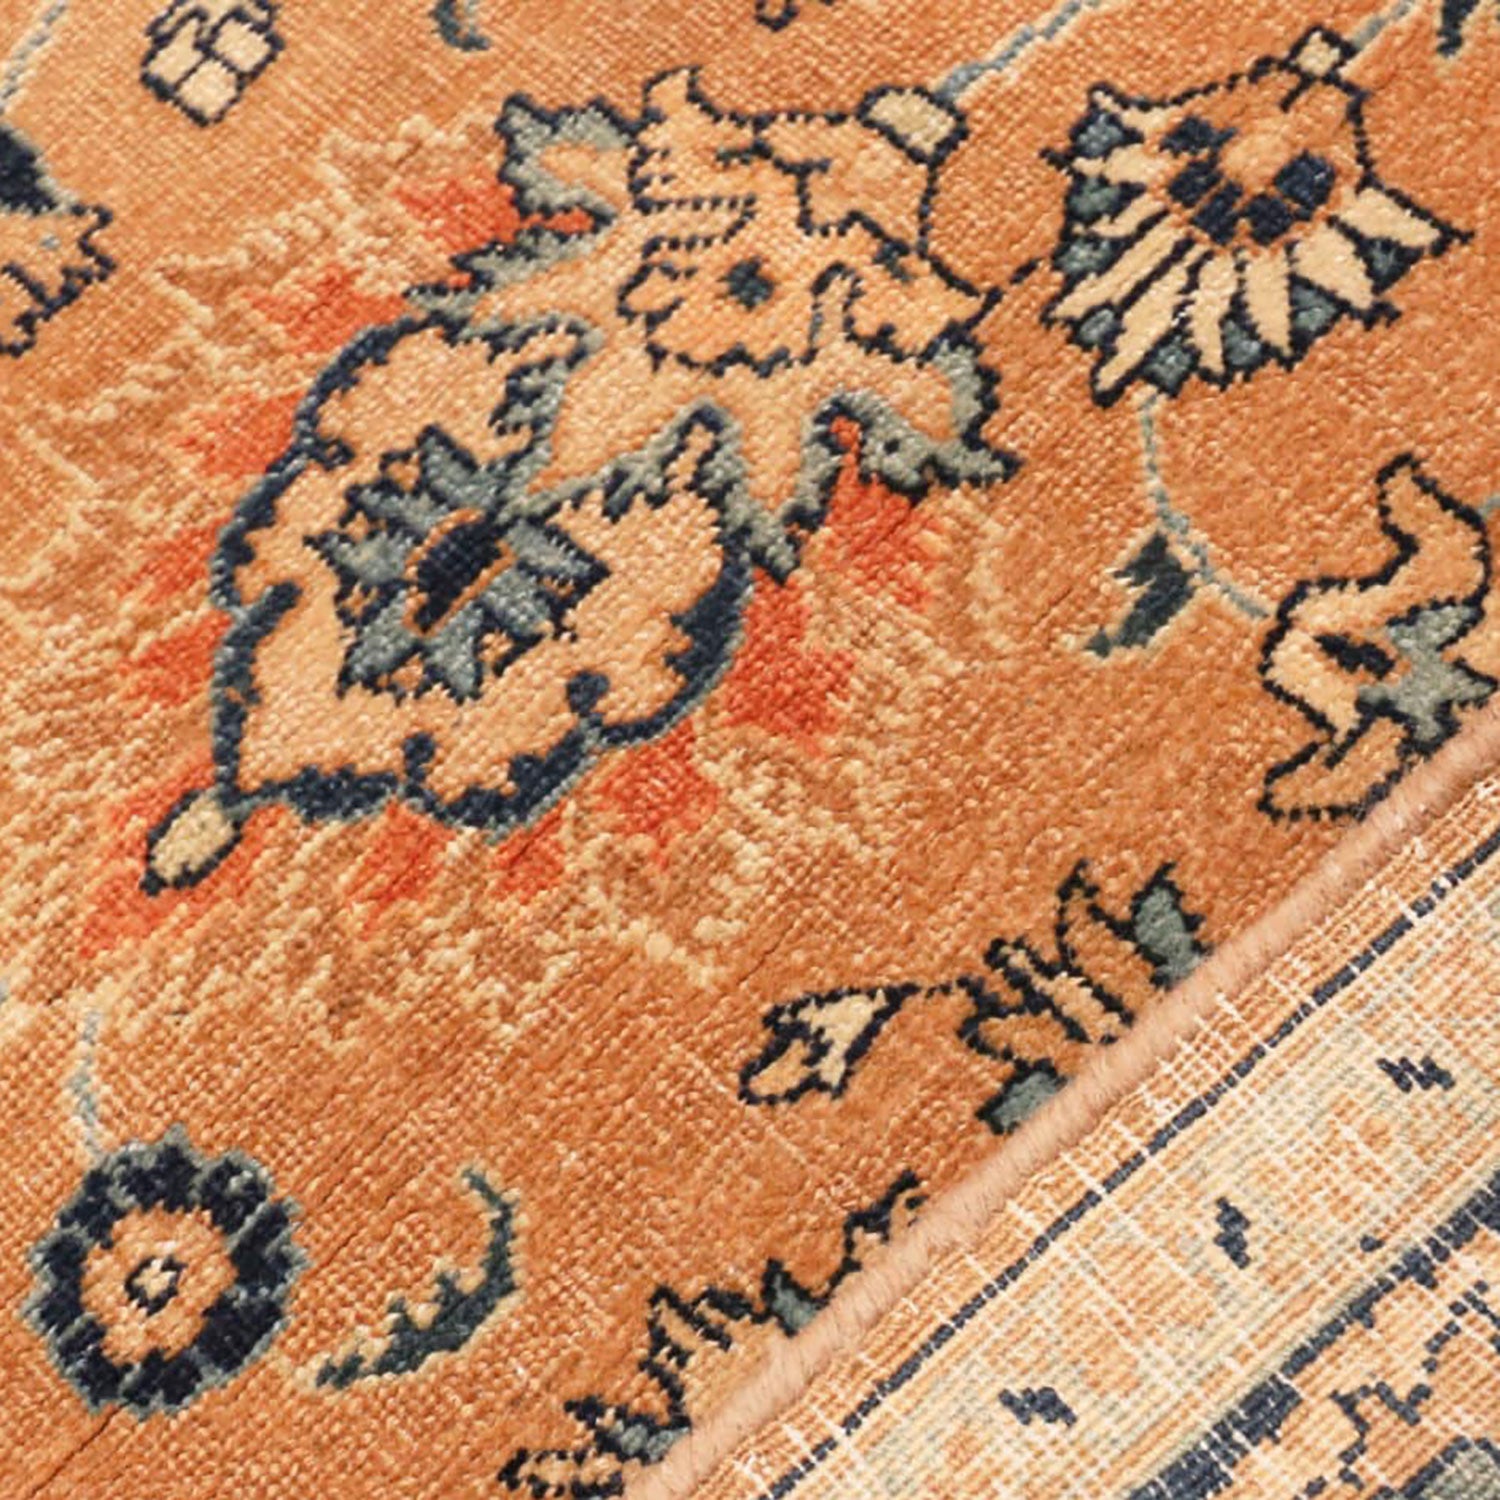 Close-up of an ornate vintage rug with traditional floral motifs.